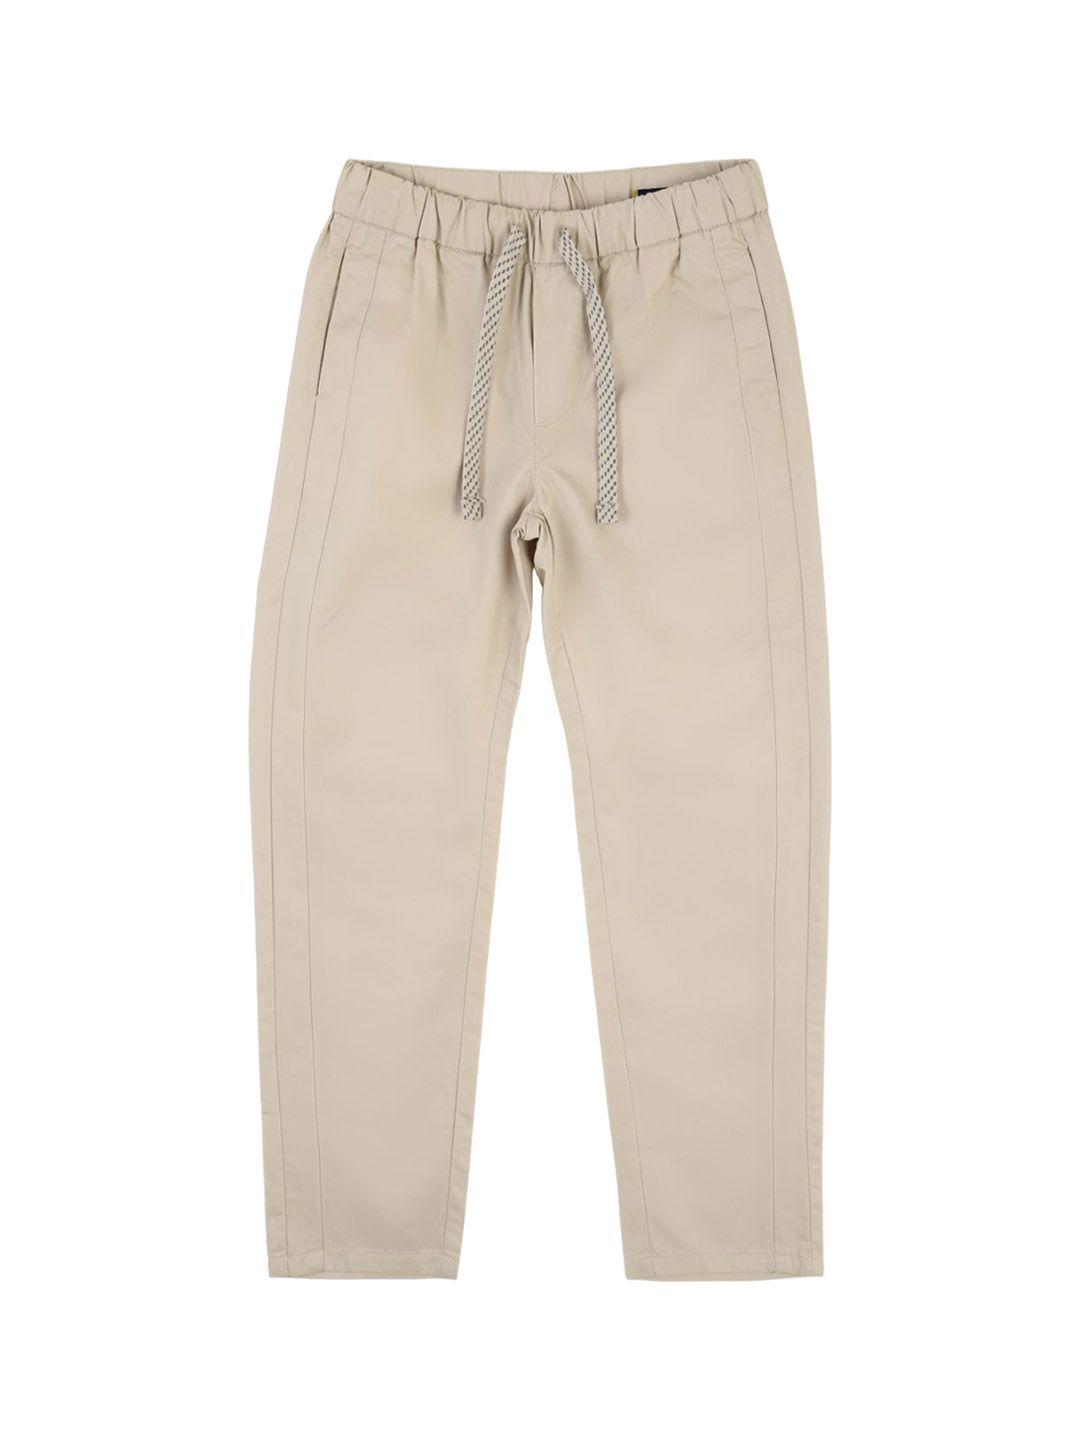 allen solly junior boys slim fit mid-rise trousers